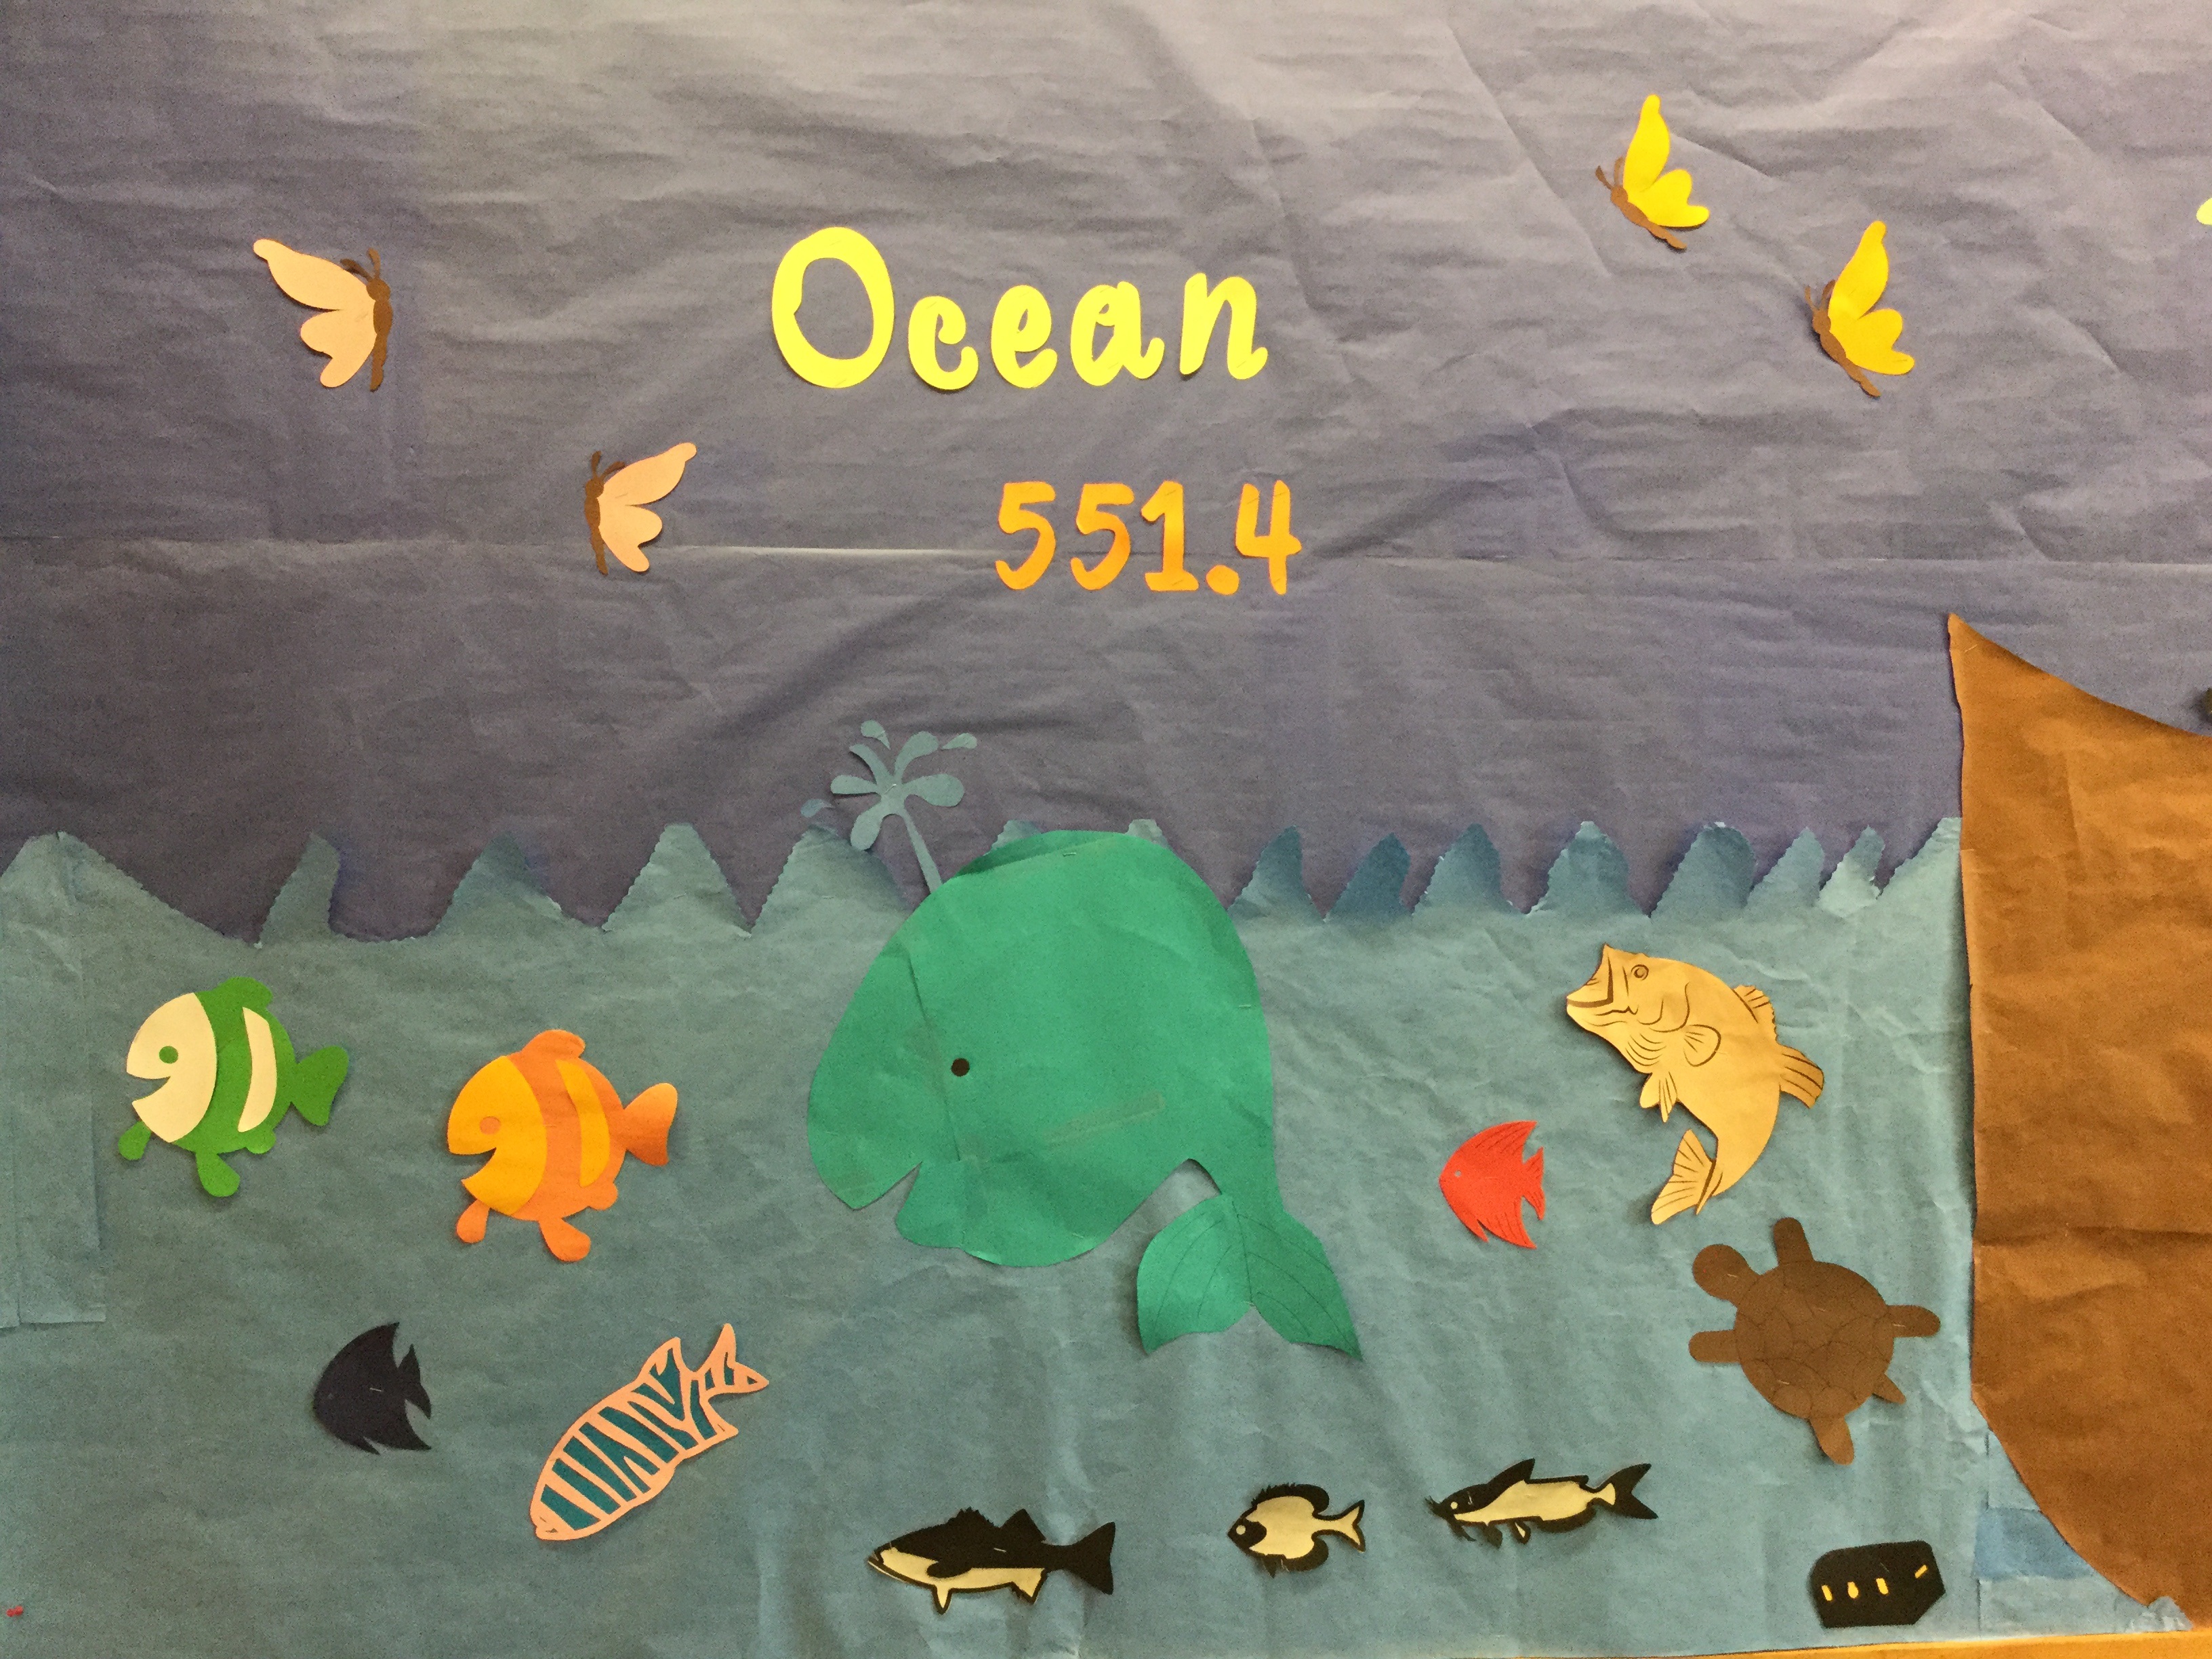 Photo of a bulletin board decorated with paper ocean cut outs